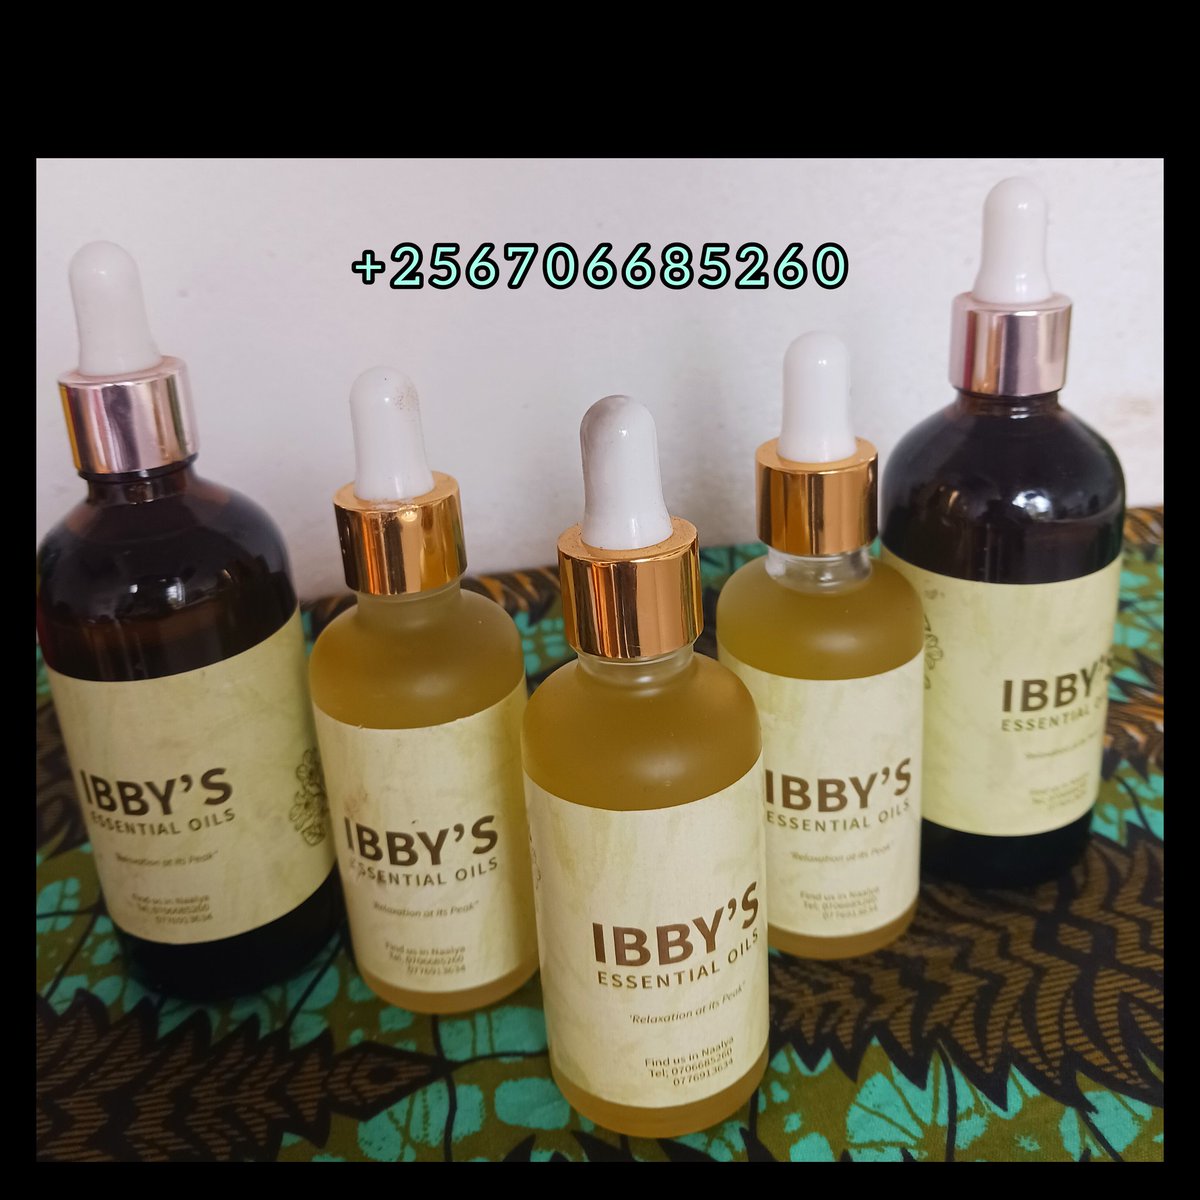 Greetings UOT, 
For scented candles&organic essential oils,I got quality for you.

The candles are scented with bubblegum,strawberry, orange and citronella as a repellant.

The oils are made out of lavender, mint,rosemary and olives.
📞0706685260
📌Najjera 2